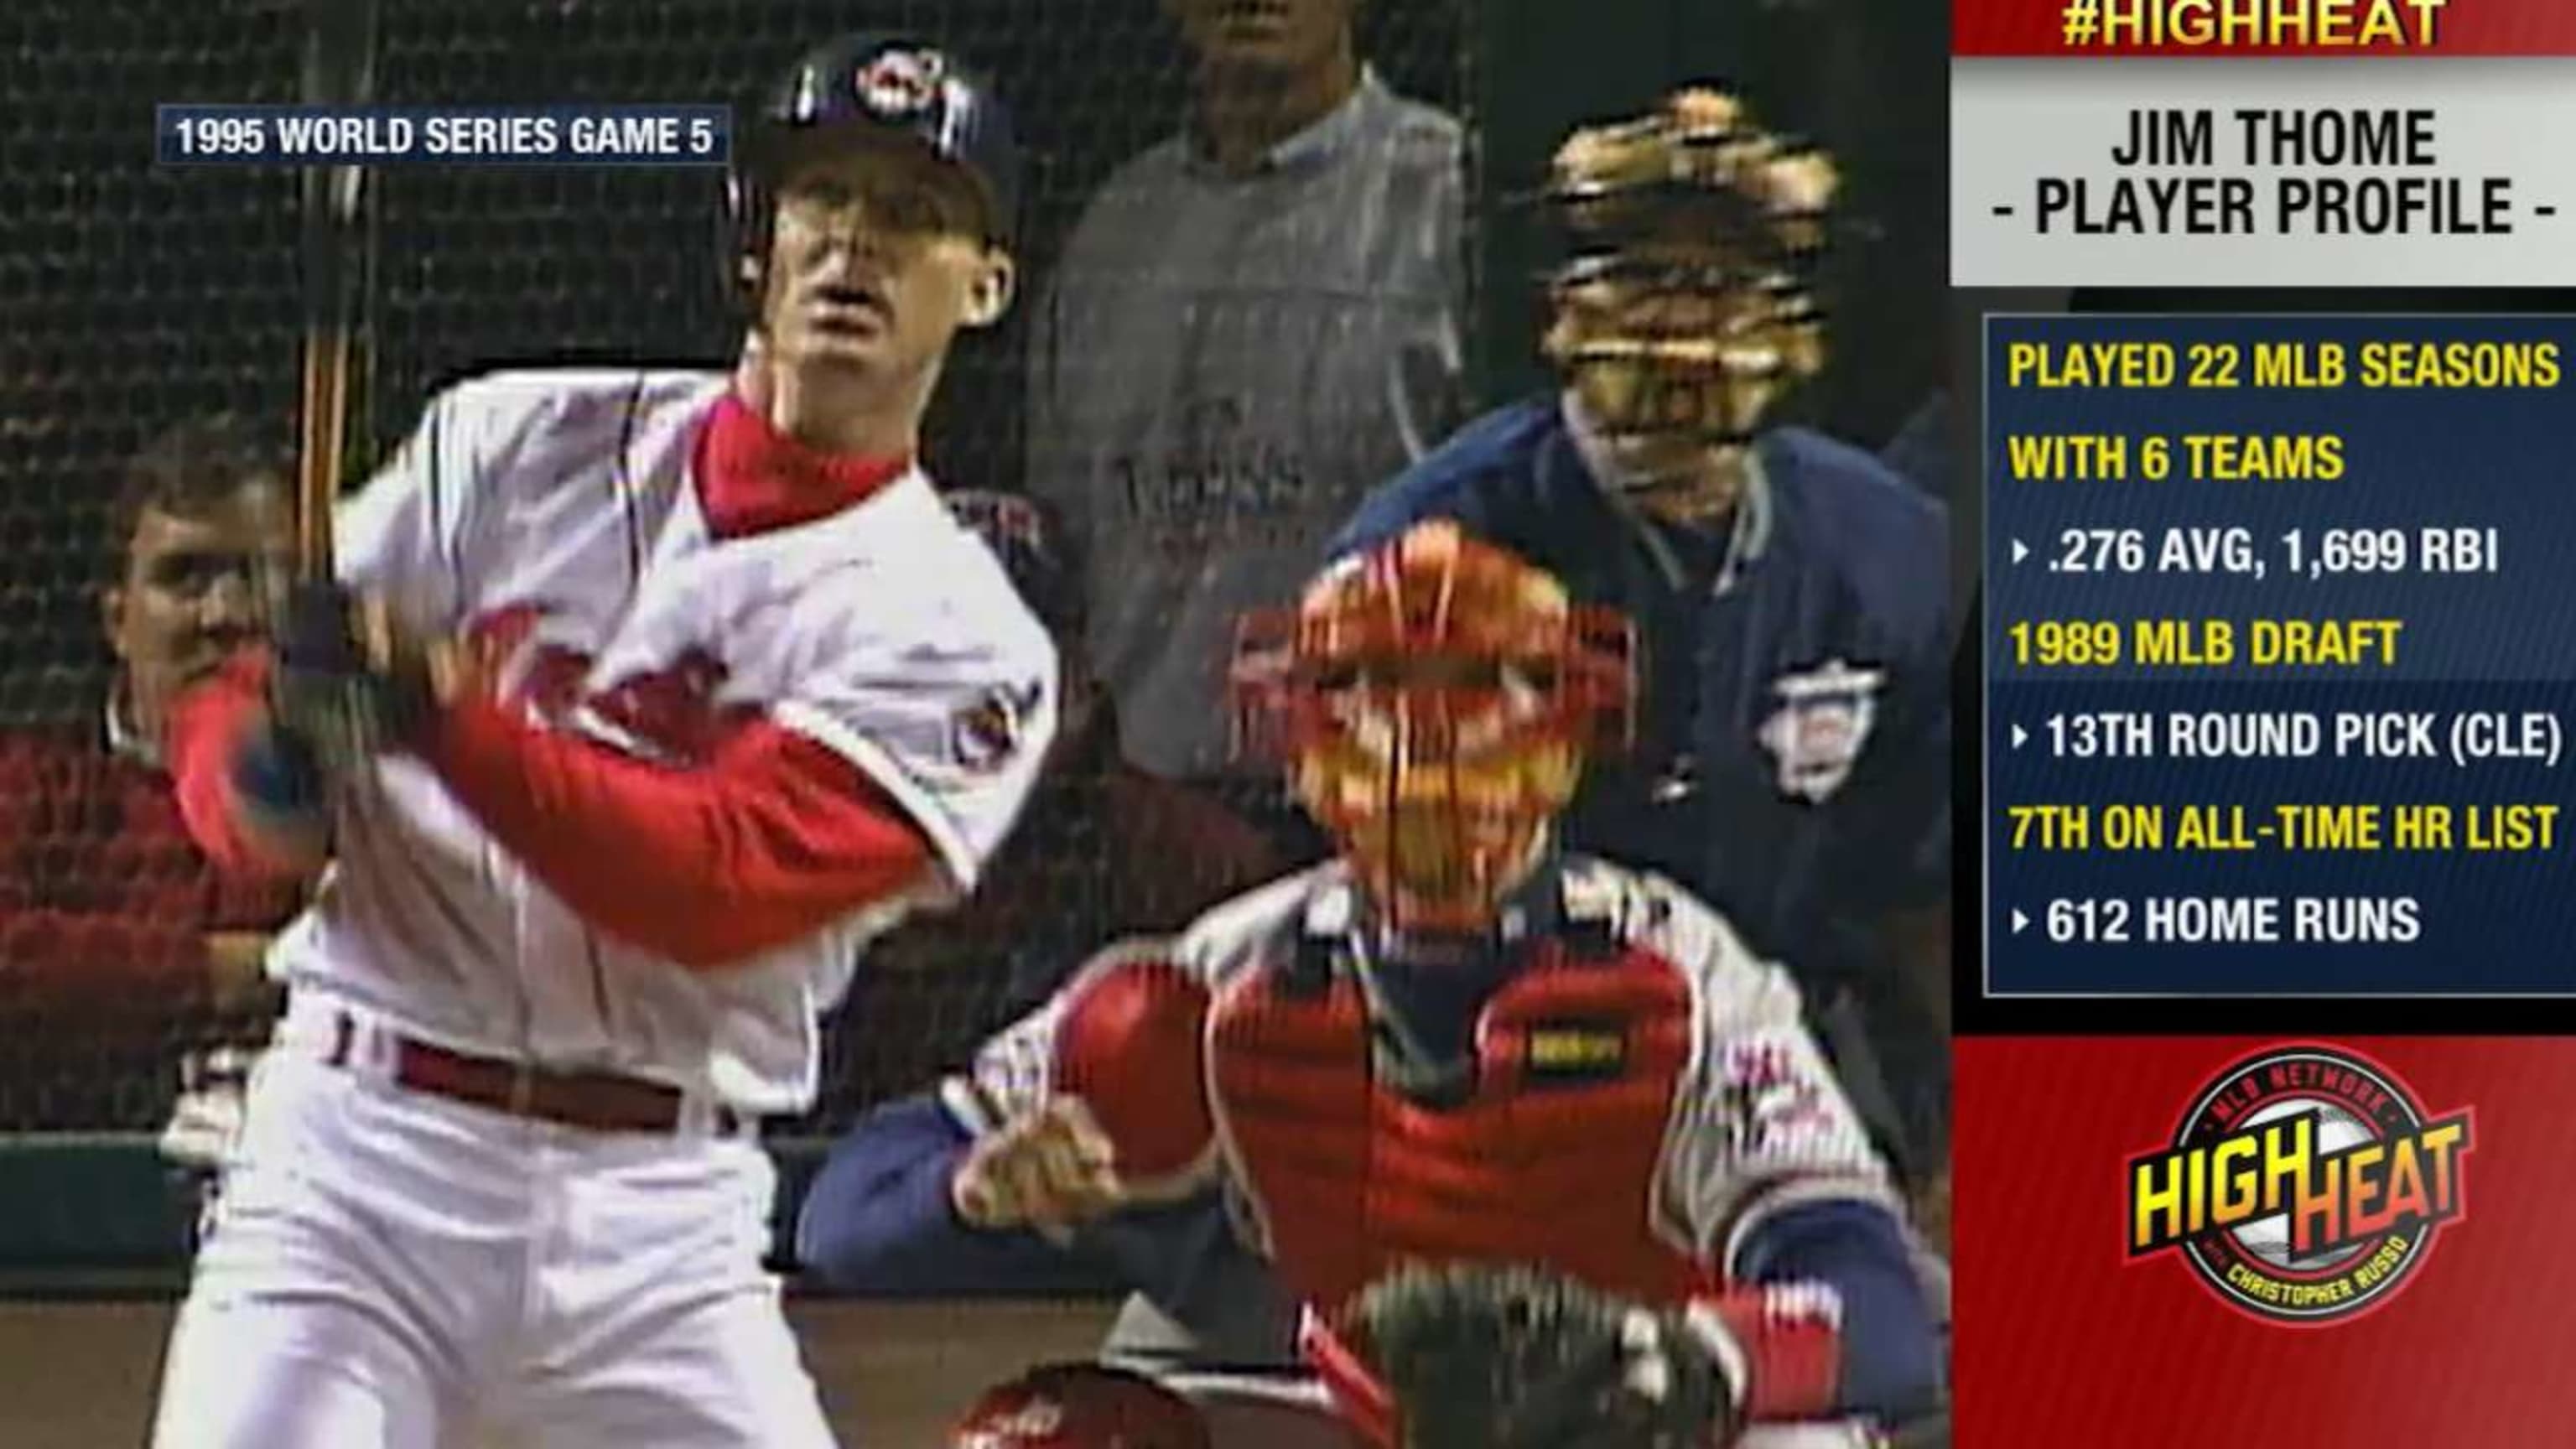 Jim Thome, Cleveland Indians Great, Inducted Into Baseball Hall Of Fame